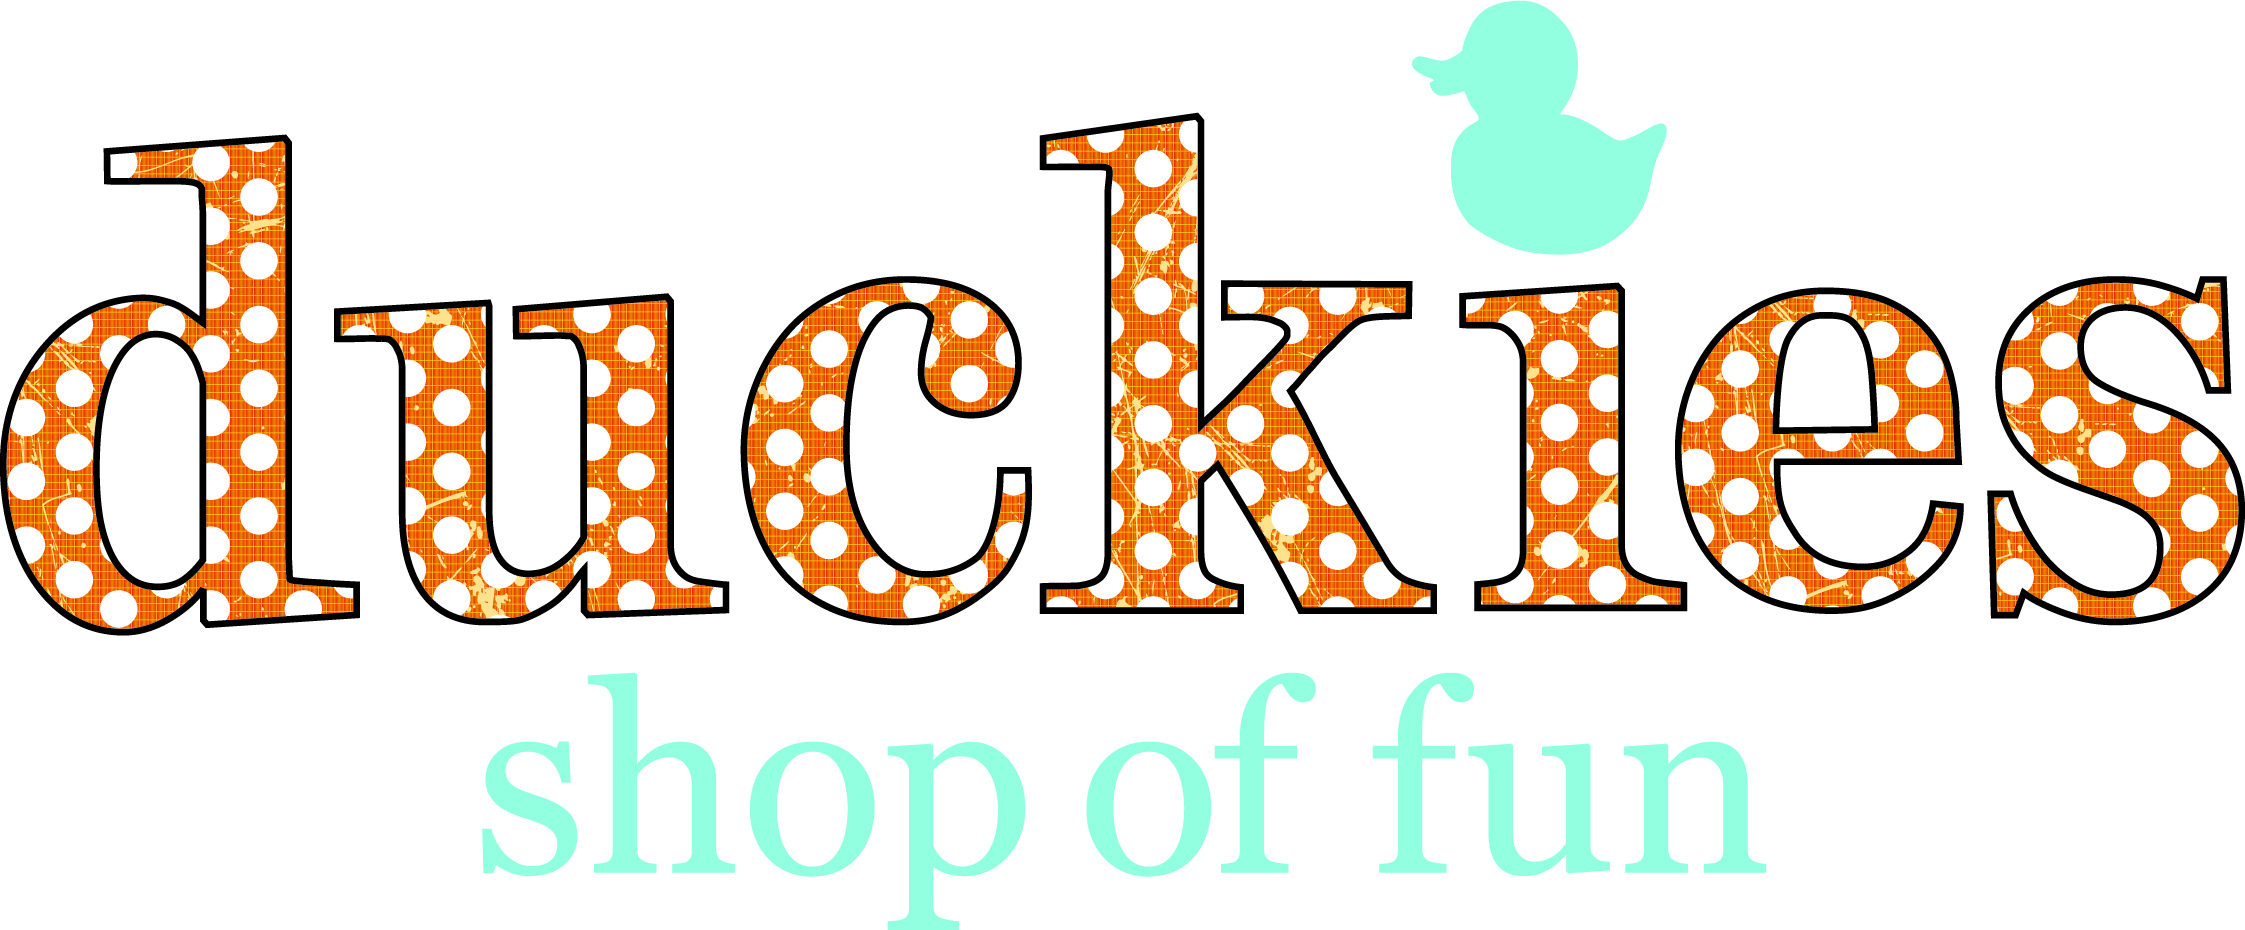 Duckies Shop of Fun
sponsor for RFI 2021 Pensacola and Milton events